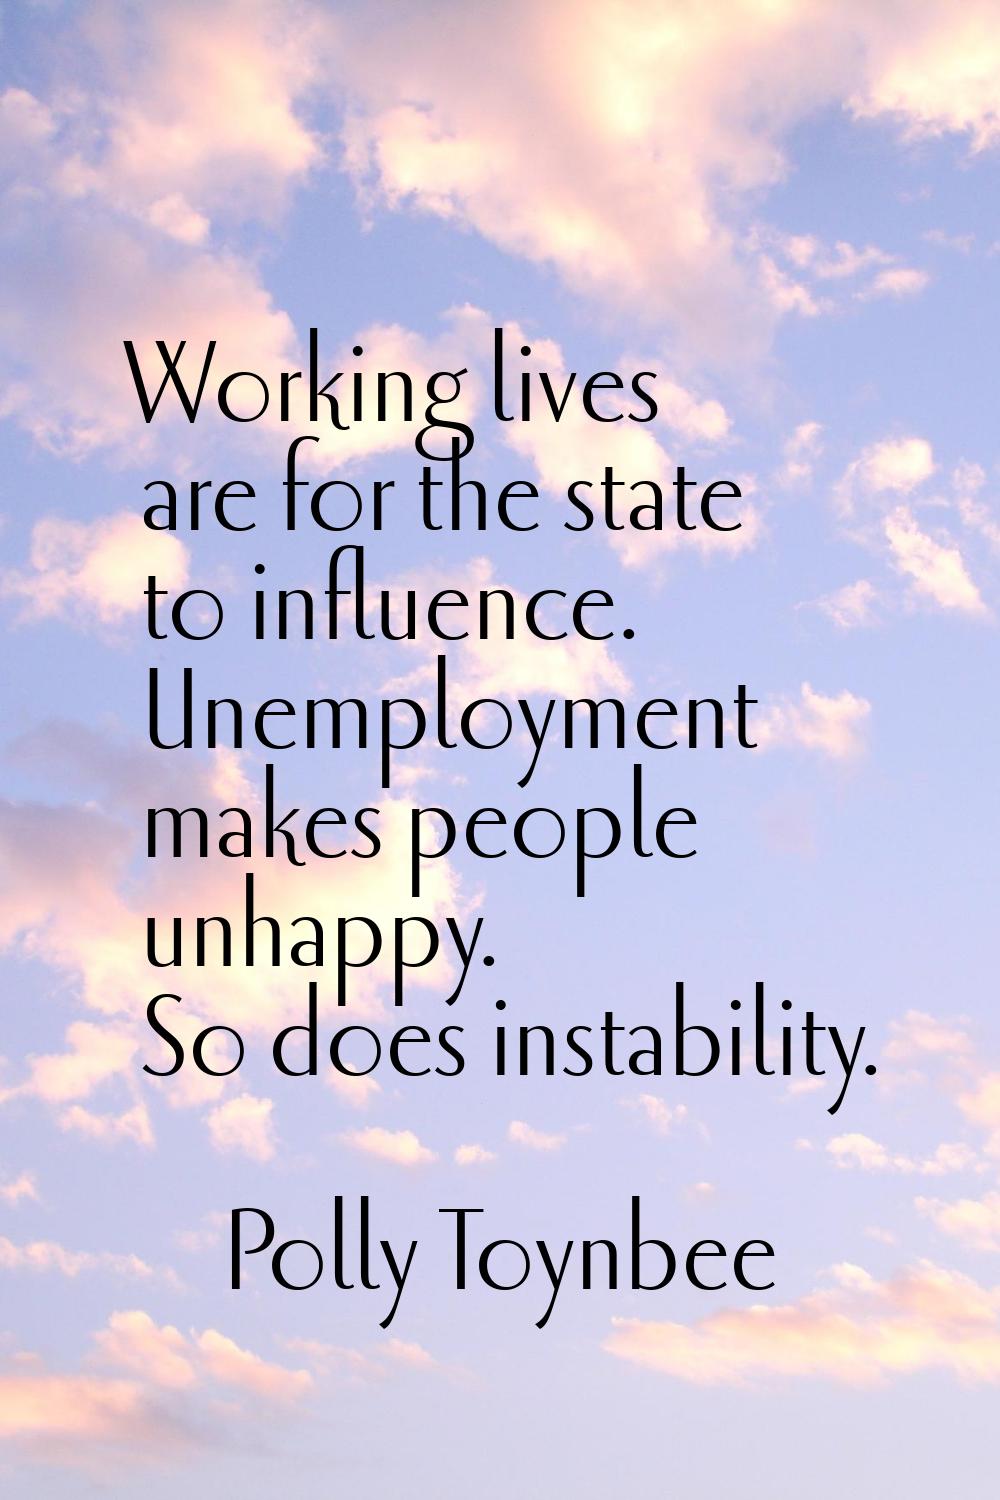 Working lives are for the state to influence. Unemployment makes people unhappy. So does instabilit